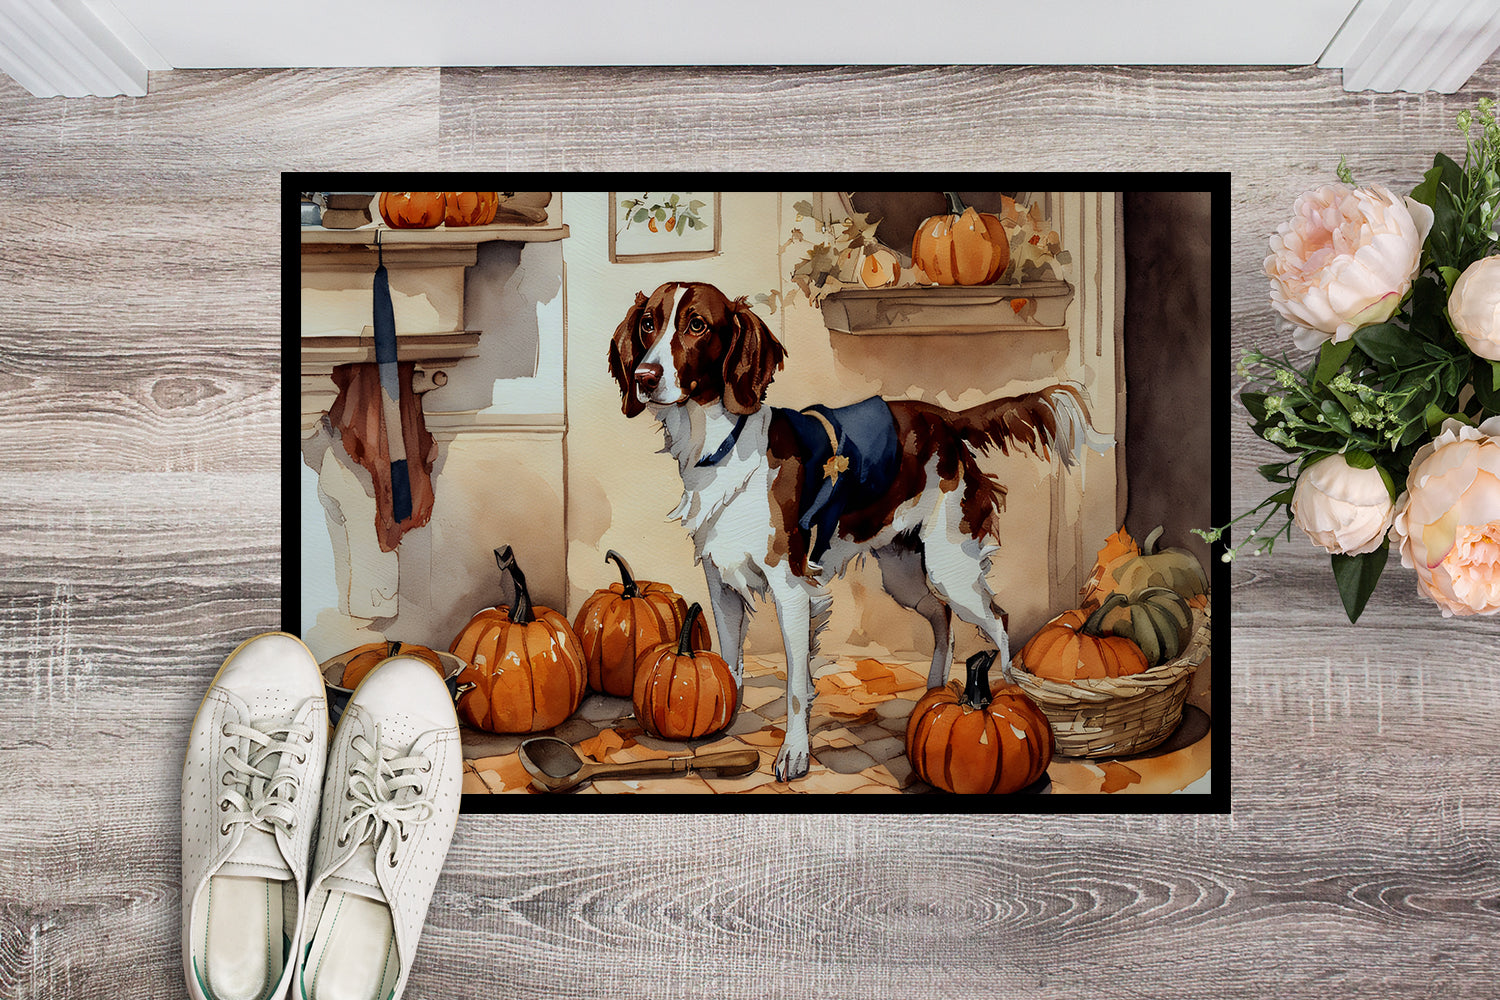 Buy this Brittany Fall Kitchen Pumpkins Indoor or Outdoor Mat 24x36